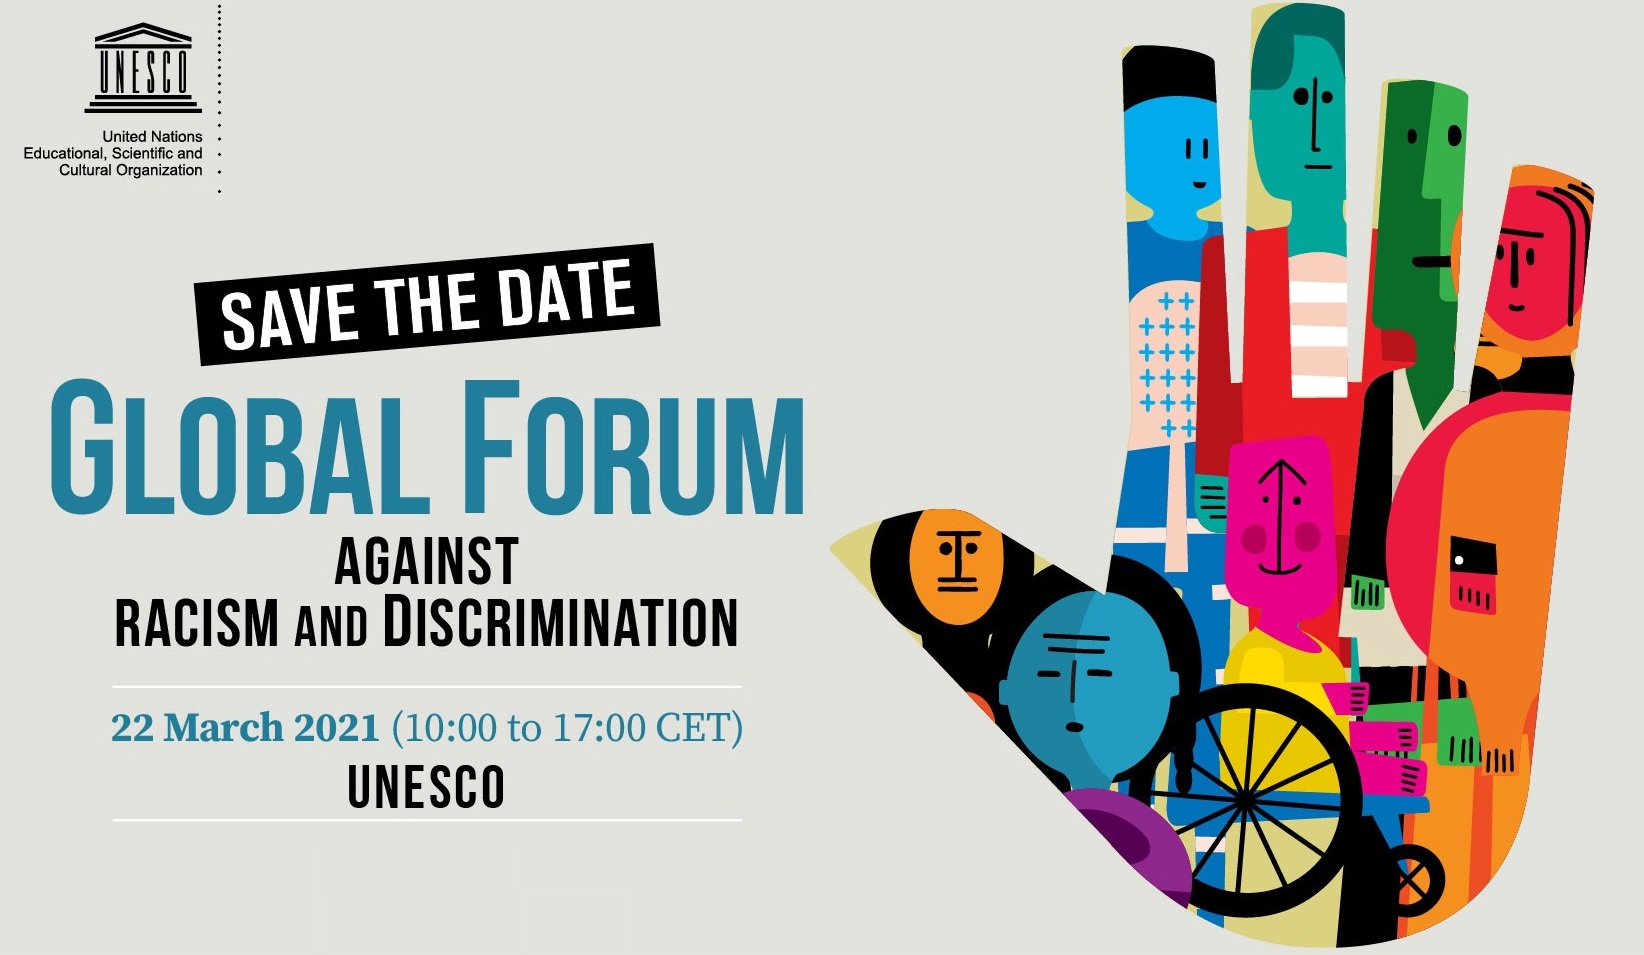 UNESCO Global Forum against Racism and Discrimination (22 March 2021